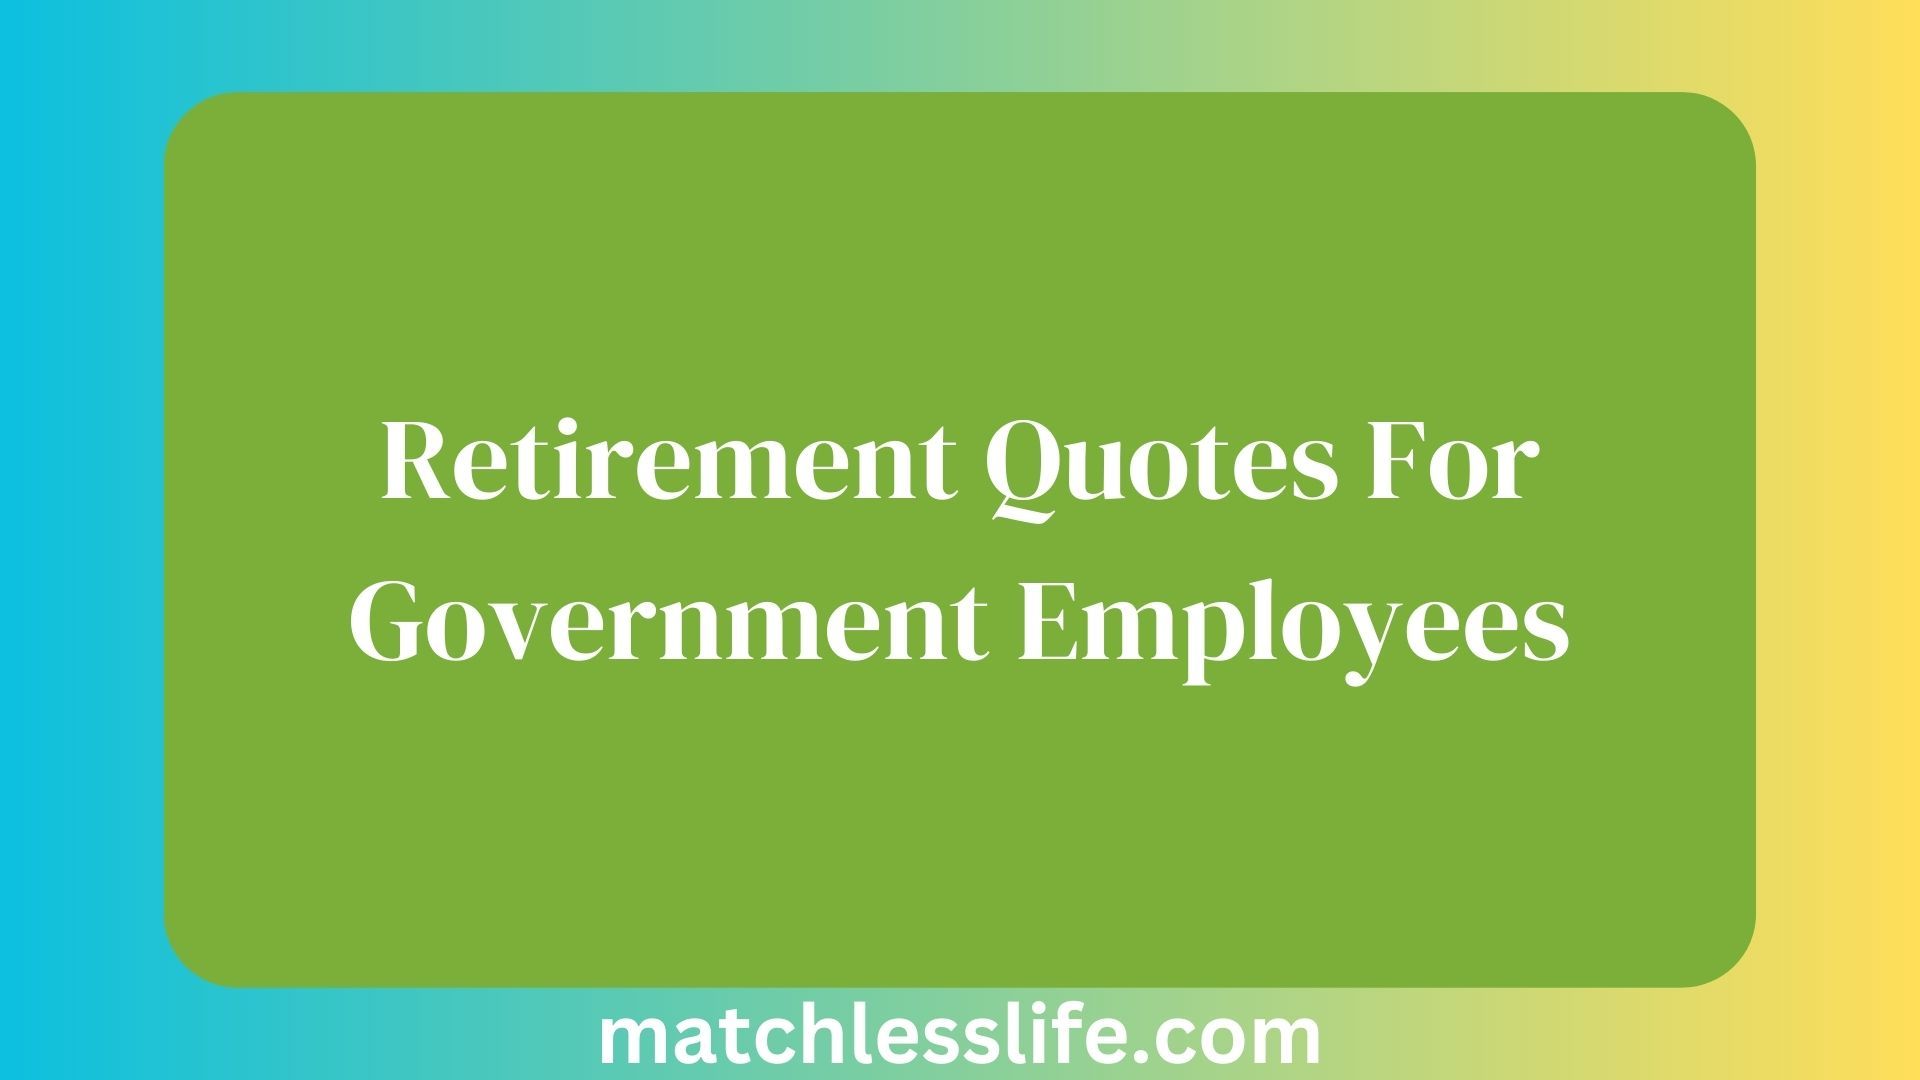 Retirement Quotes For Government Employees